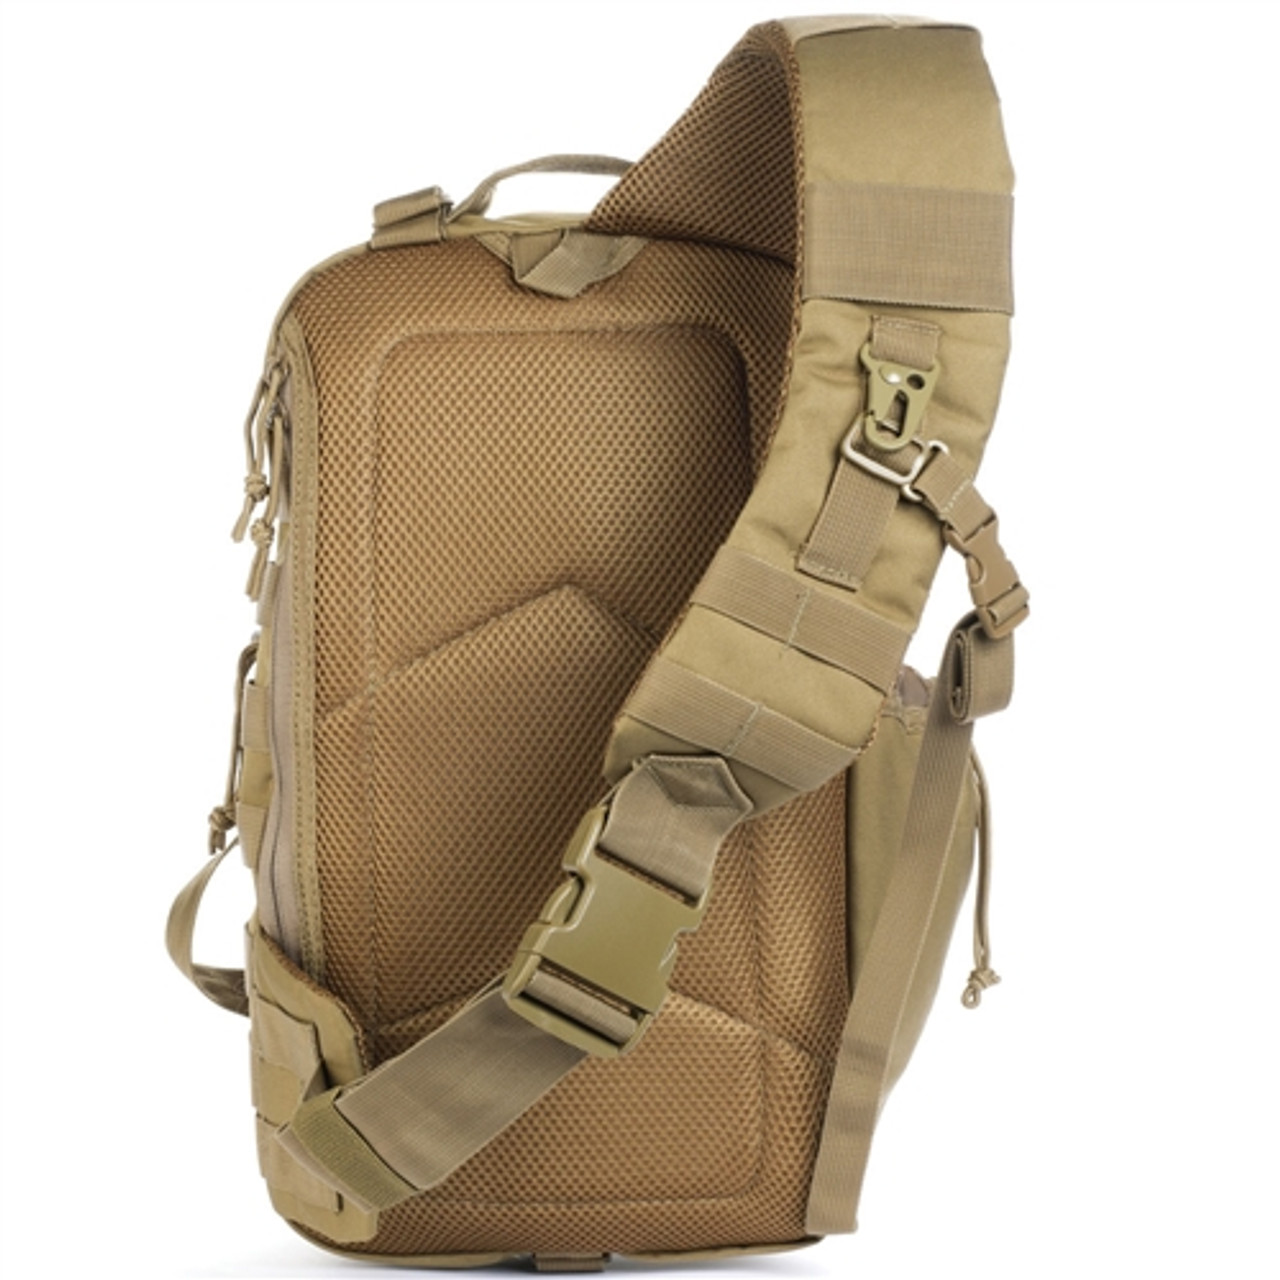 Coyote Rambler Sling Pack | Military Luggage